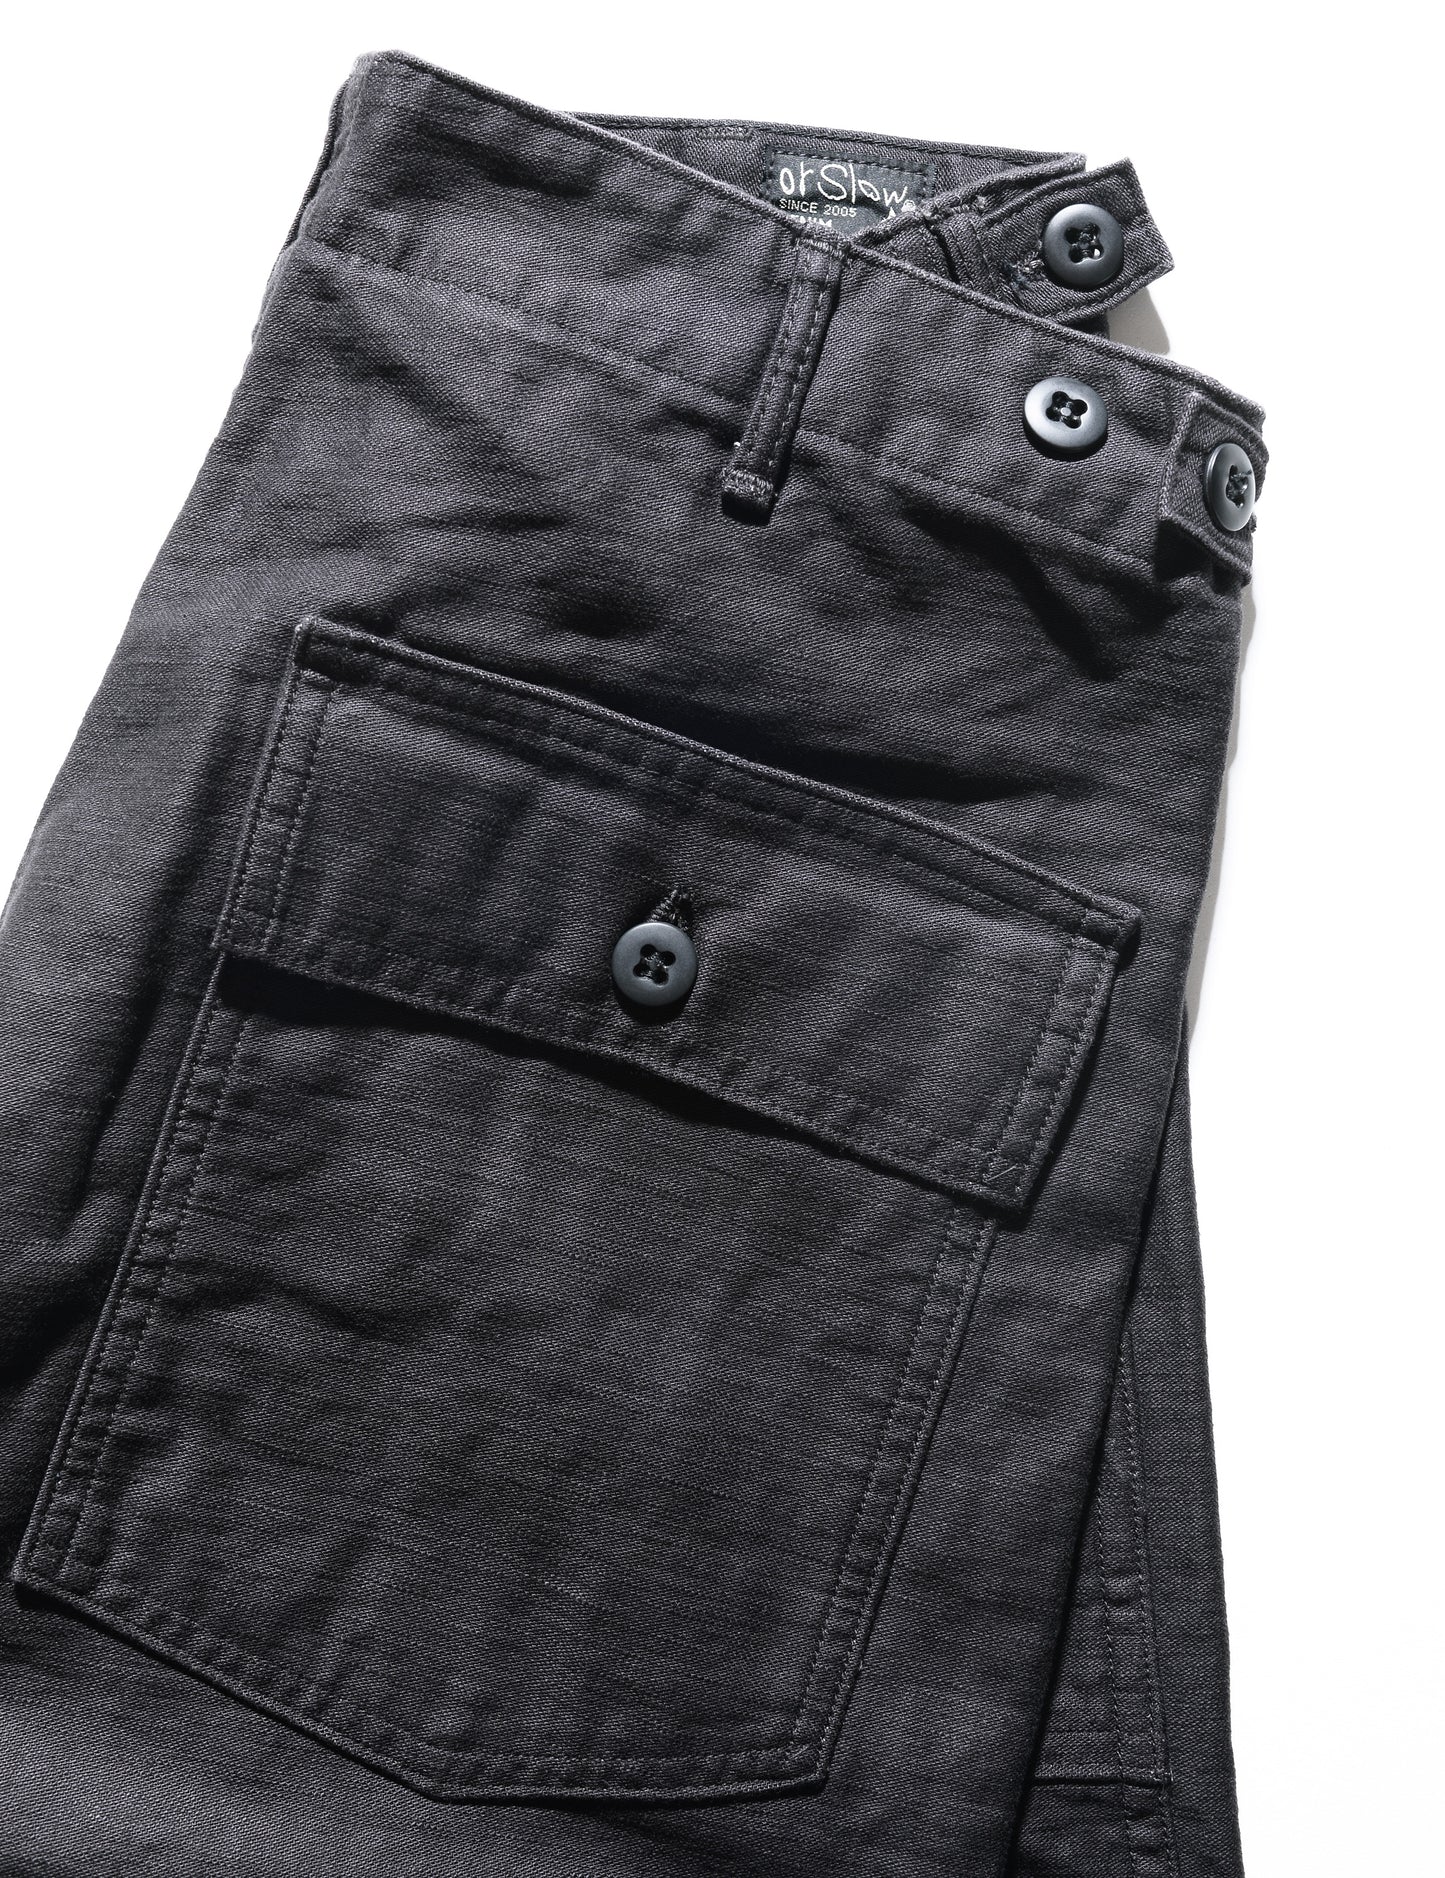 Back pocket detail of Orslow US Army Fatigue Trousers - Black